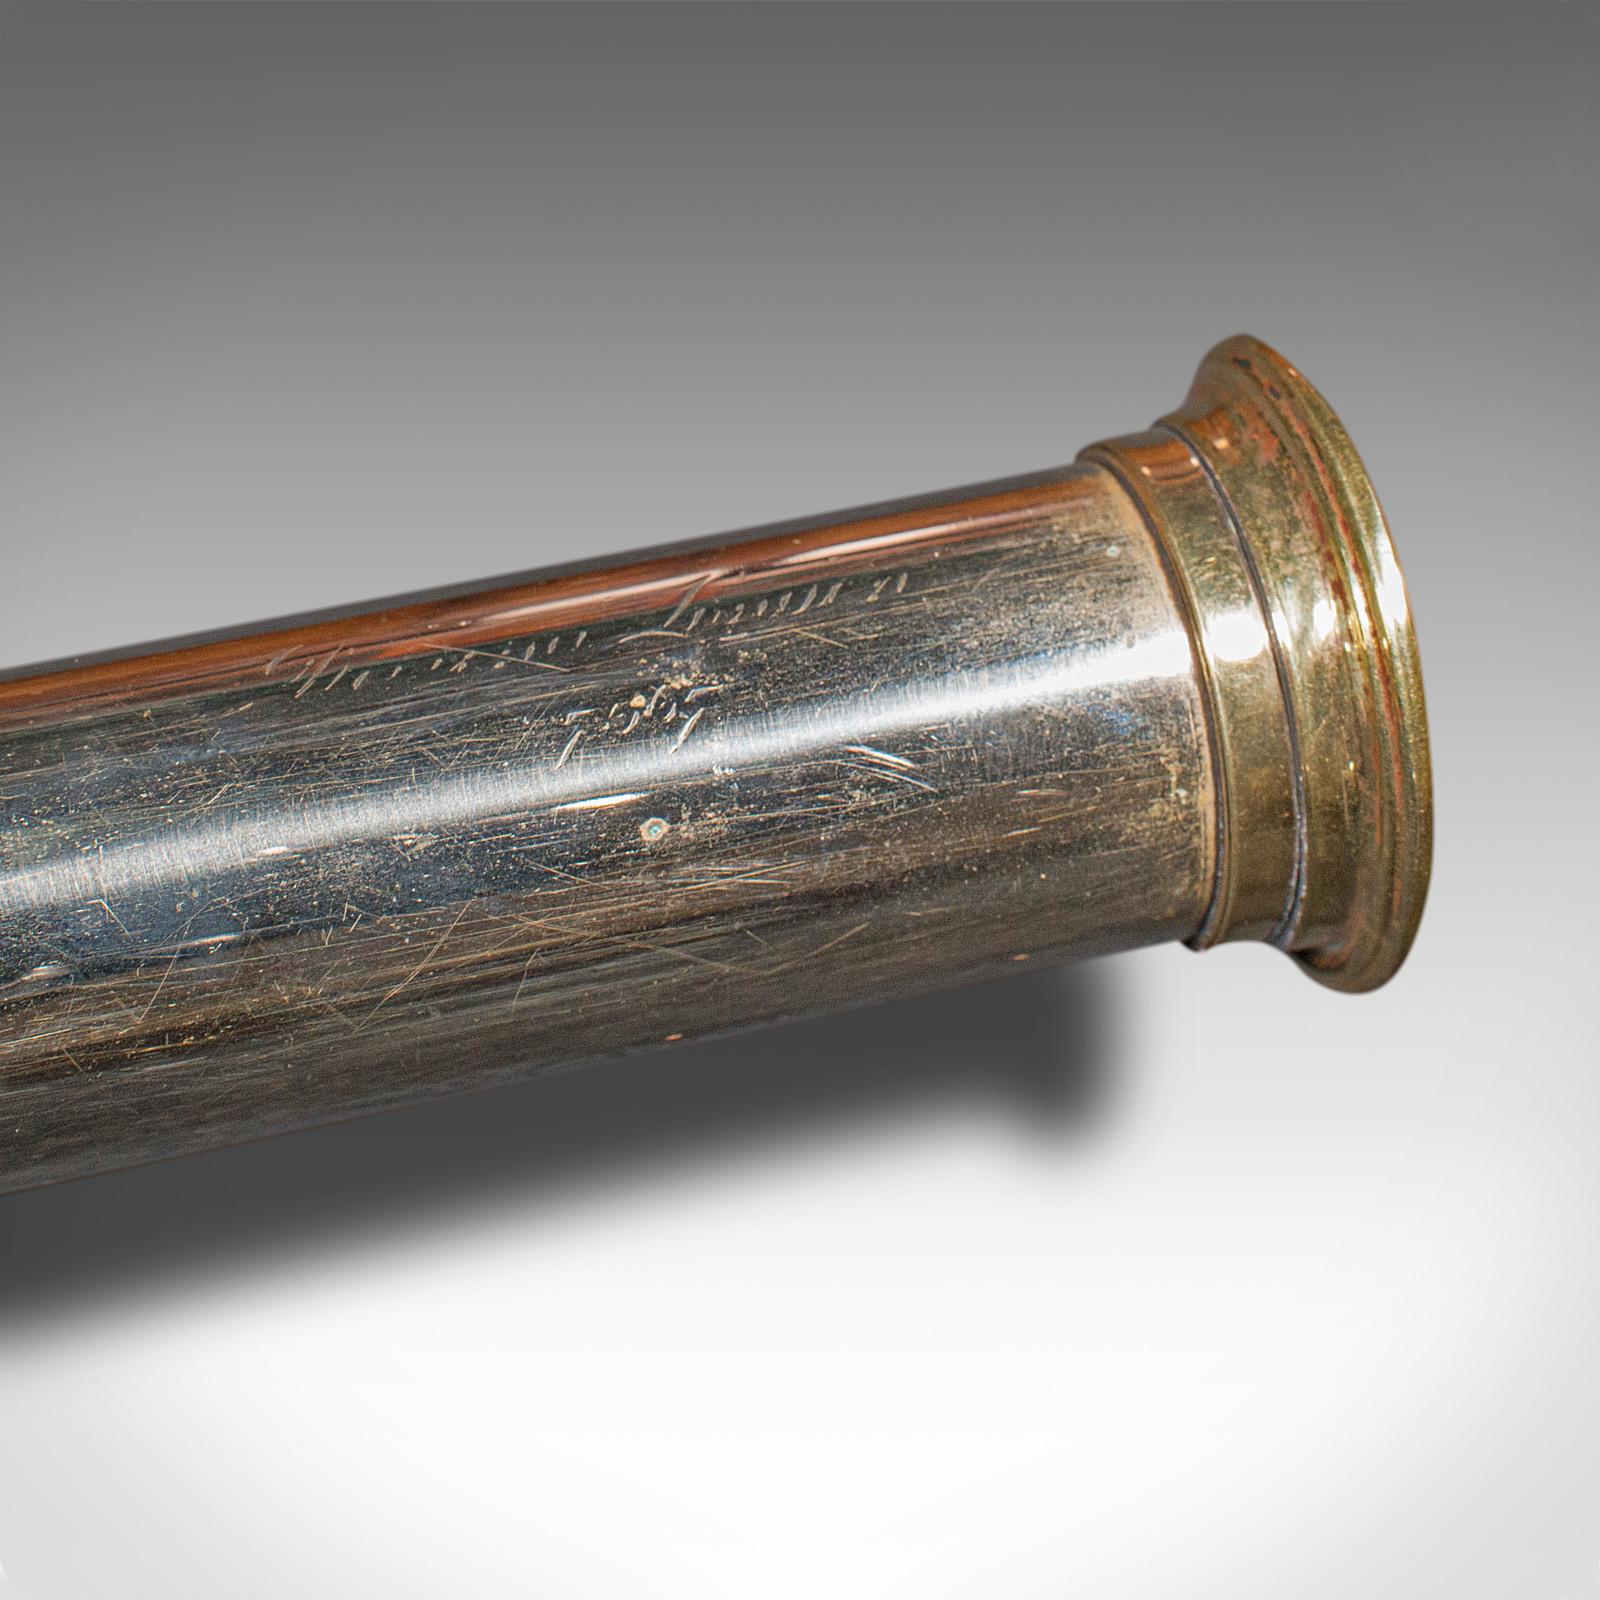 Antique Officer of the Watch Telescope, English, After Dollond, Victorian, 1890 For Sale 3